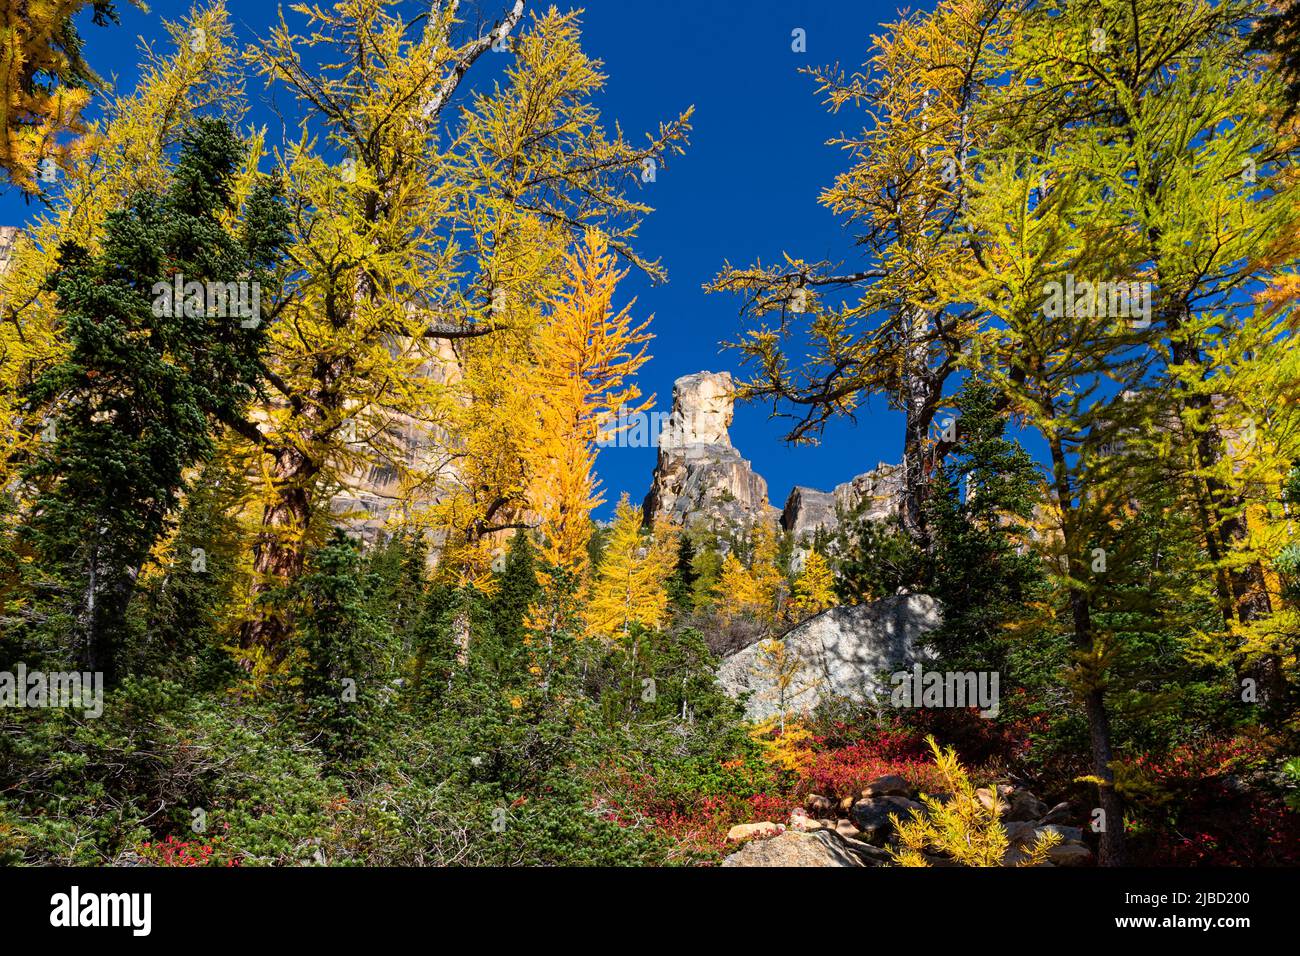 WA21632-00...WASHINGTON - Alpine larch in fall colors below Lexington Tower, one of the Libery Bell Group, in the Okanogan - Wenatchee National Forest Stock Photo